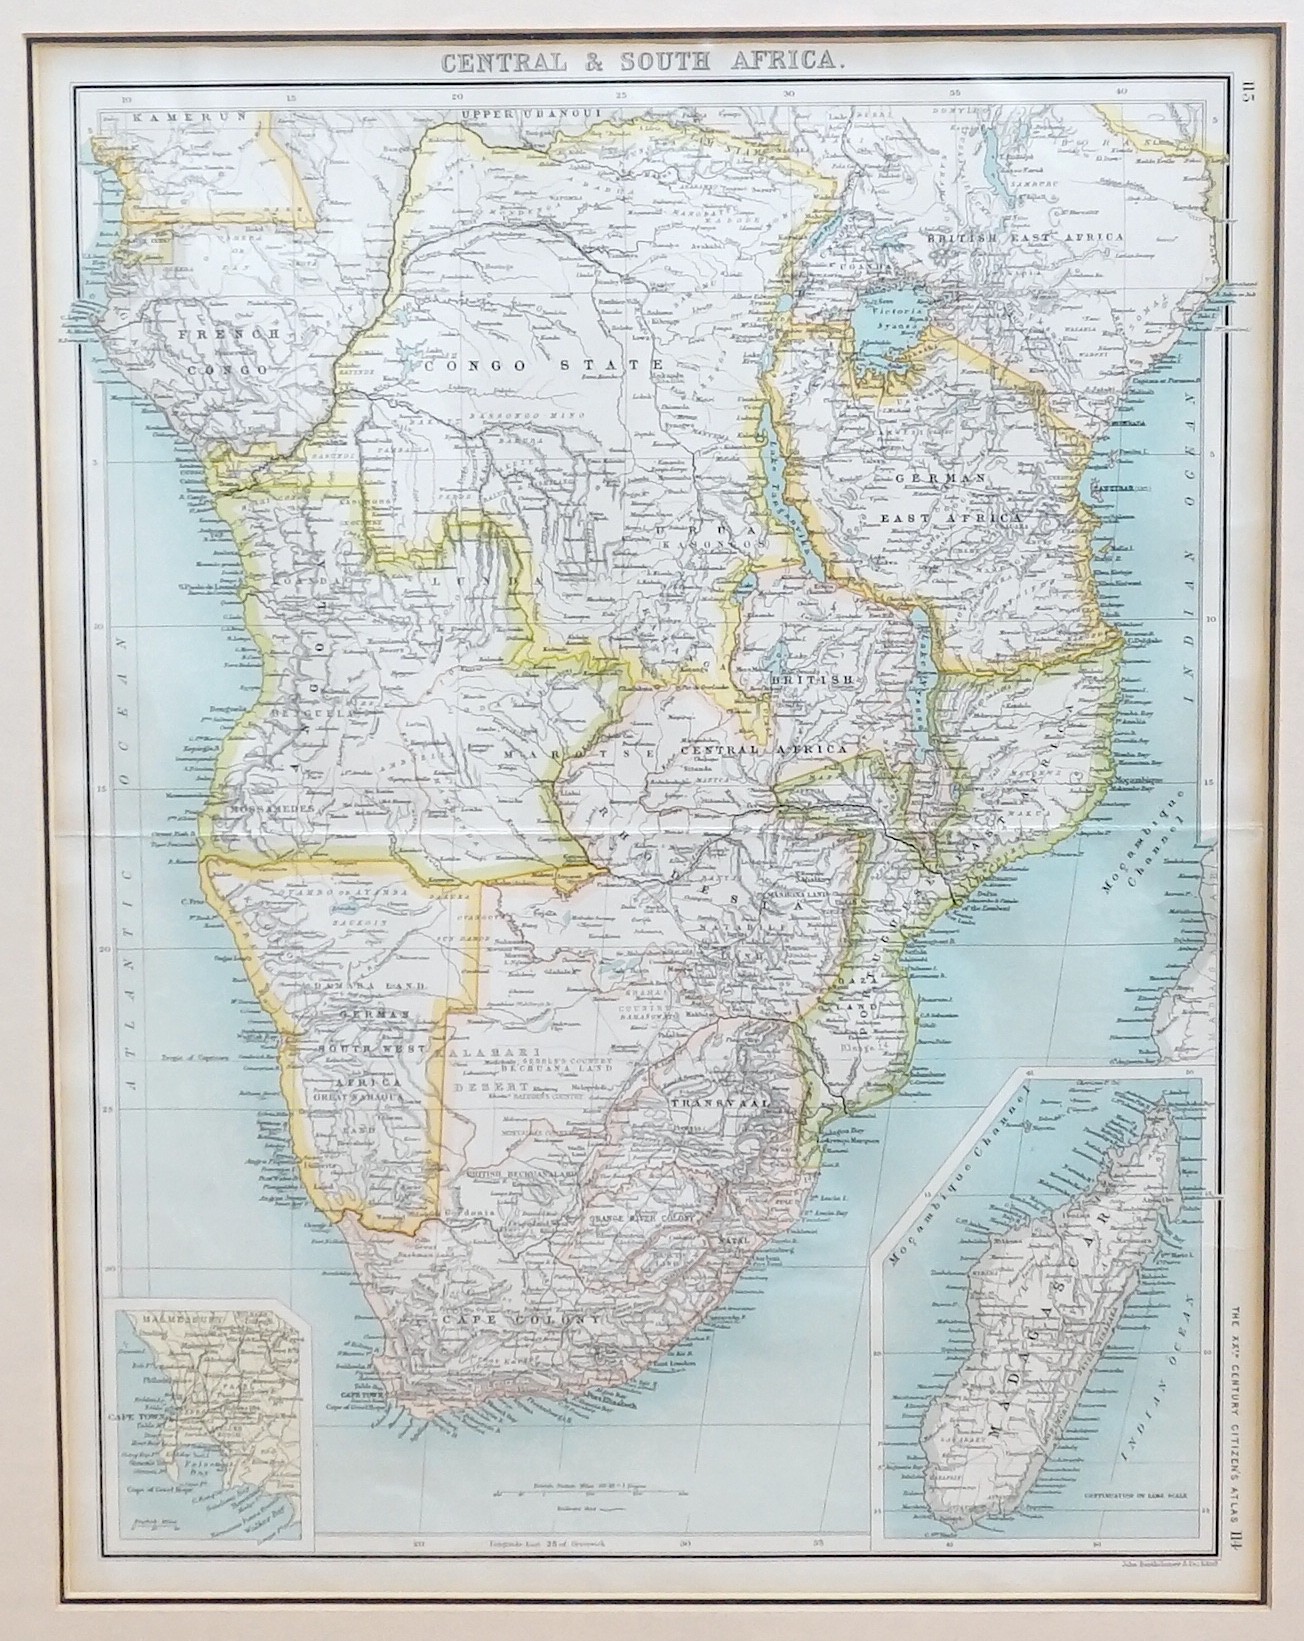 John Bartholomew / The XXth Citizens Atlas, Maps of British Central Africa Protectorate and Central and South Africa, 67 x 30cm and 43 x 34cm                                                                               